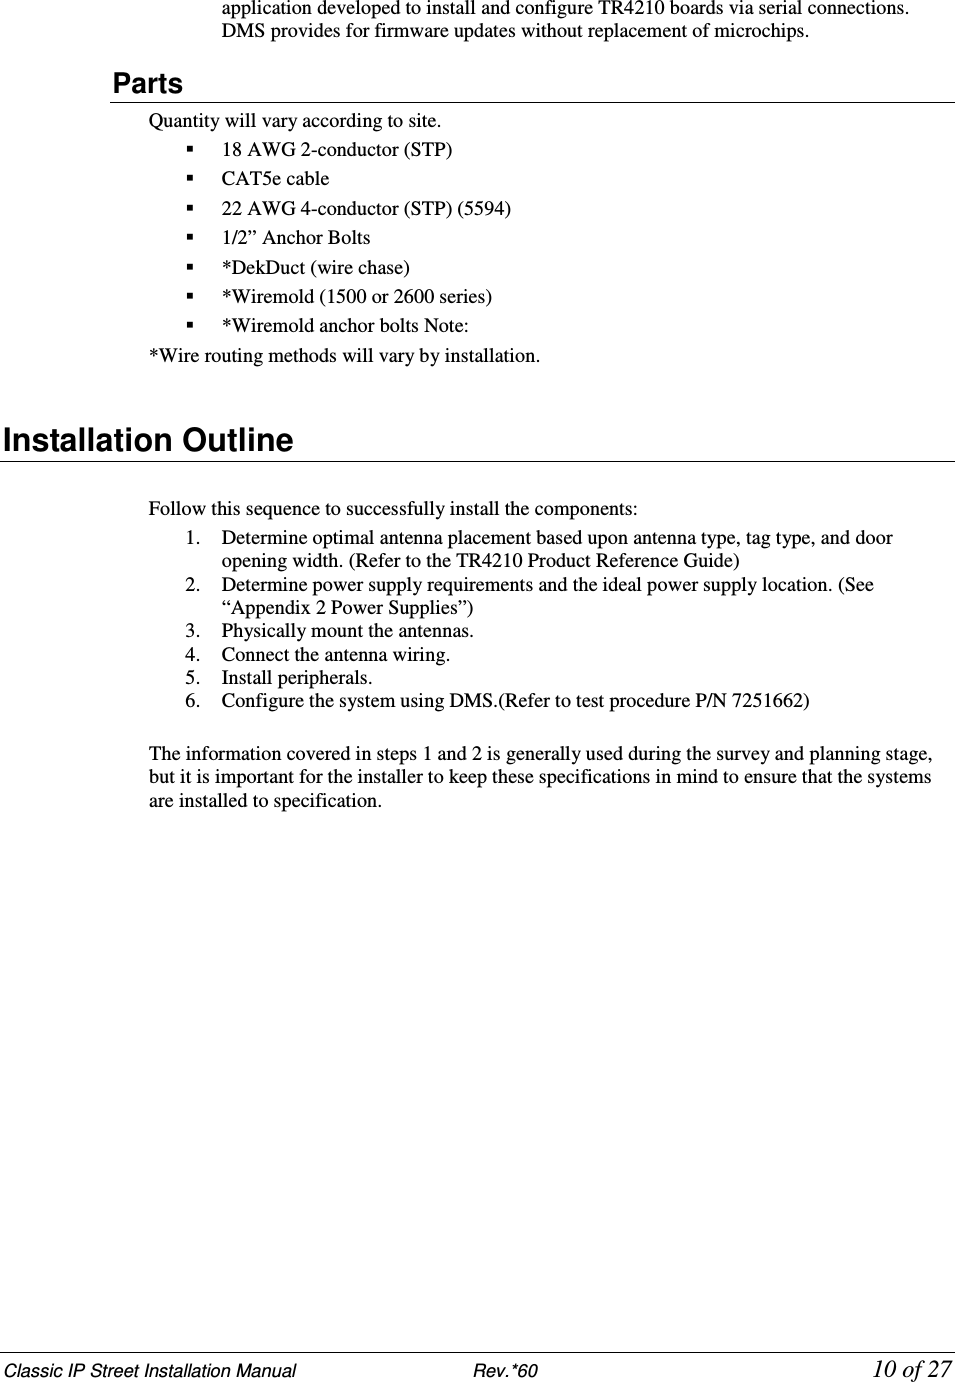 Classic IP Street Installation Manual                           Rev.*60            10 of 27 application developed to install and configure TR4210 boards via serial connections. DMS provides for firmware updates without replacement of microchips. Parts Quantity will vary according to site.  18 AWG 2-conductor (STP)  CAT5e cable  22 AWG 4-conductor (STP) (5594)   1/2” Anchor Bolts  *DekDuct (wire chase)  *Wiremold (1500 or 2600 series)  *Wiremold anchor bolts Note:  *Wire routing methods will vary by installation.  Installation Outline   Follow this sequence to successfully install the components:  1. Determine optimal antenna placement based upon antenna type, tag type, and door opening width. (Refer to the TR4210 Product Reference Guide) 2. Determine power supply requirements and the ideal power supply location. (See “Appendix 2 Power Supplies”)  3. Physically mount the antennas.  4. Connect the antenna wiring. 5. Install peripherals.  6. Configure the system using DMS.(Refer to test procedure P/N 7251662)  The information covered in steps 1 and 2 is generally used during the survey and planning stage, but it is important for the installer to keep these specifications in mind to ensure that the systems are installed to specification.   